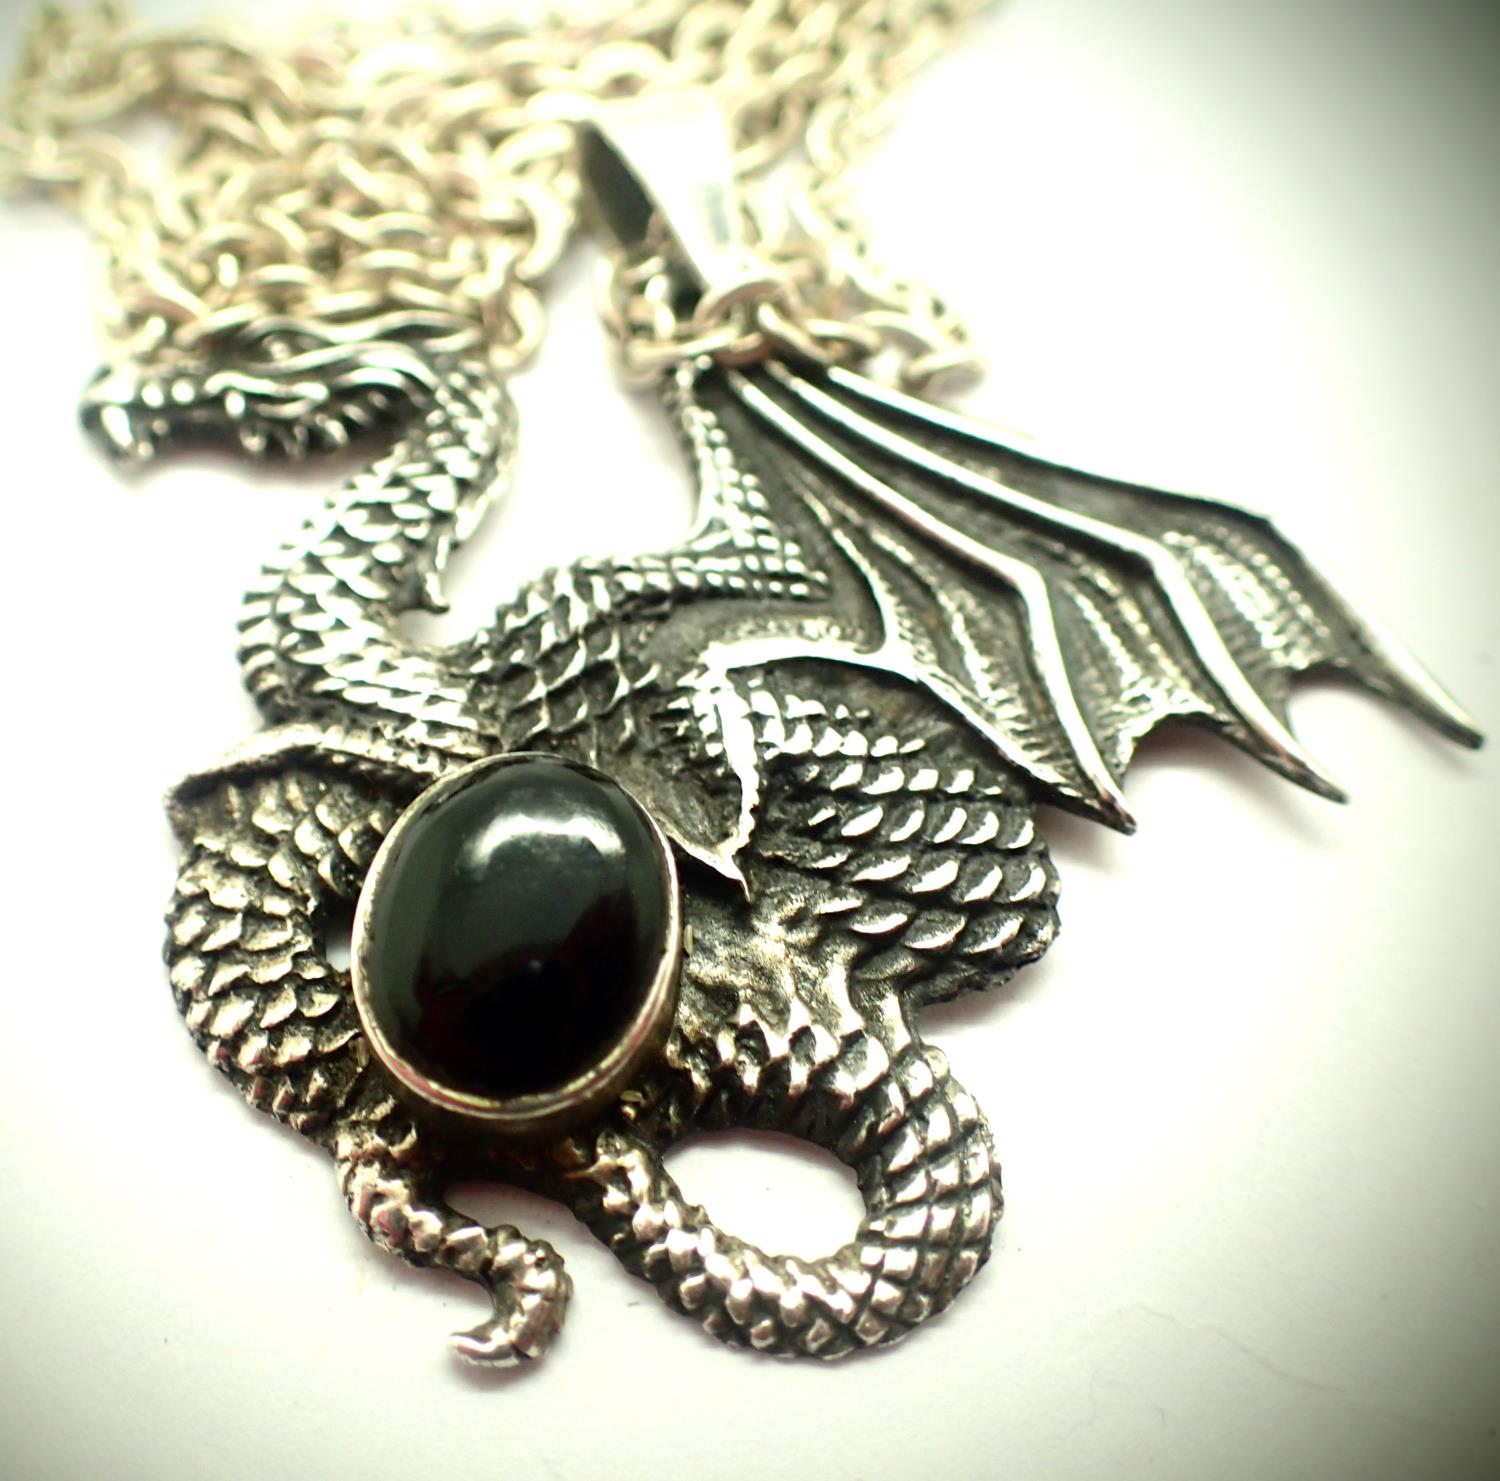 Silver dragon pendant with black onyx on a silver chain. P&P Group 1 (£14+VAT for the first lot